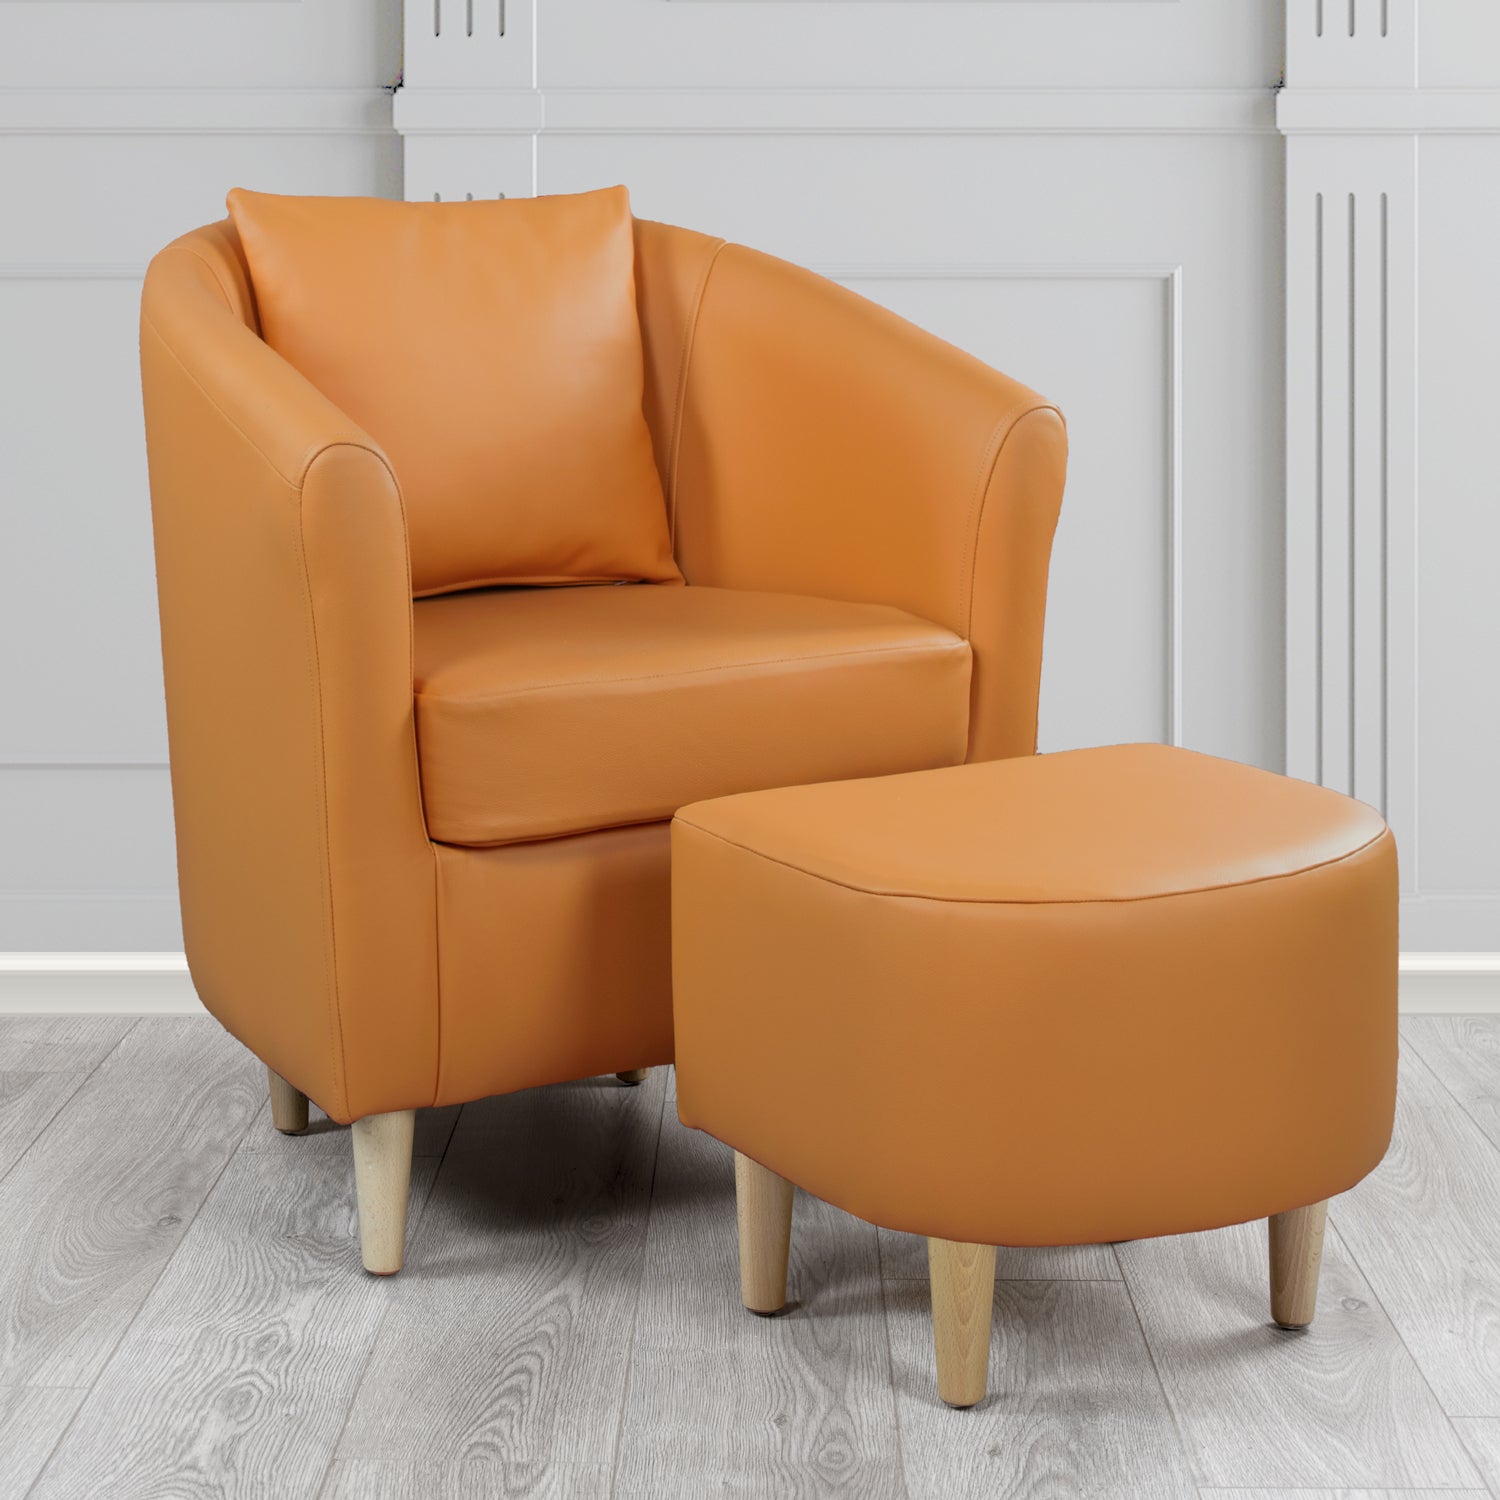 St Tropez Shelly Saddle Crib 5 Genuine Leather Tub Chair & Footstool Set With Scatter Cushion (6619518042154)